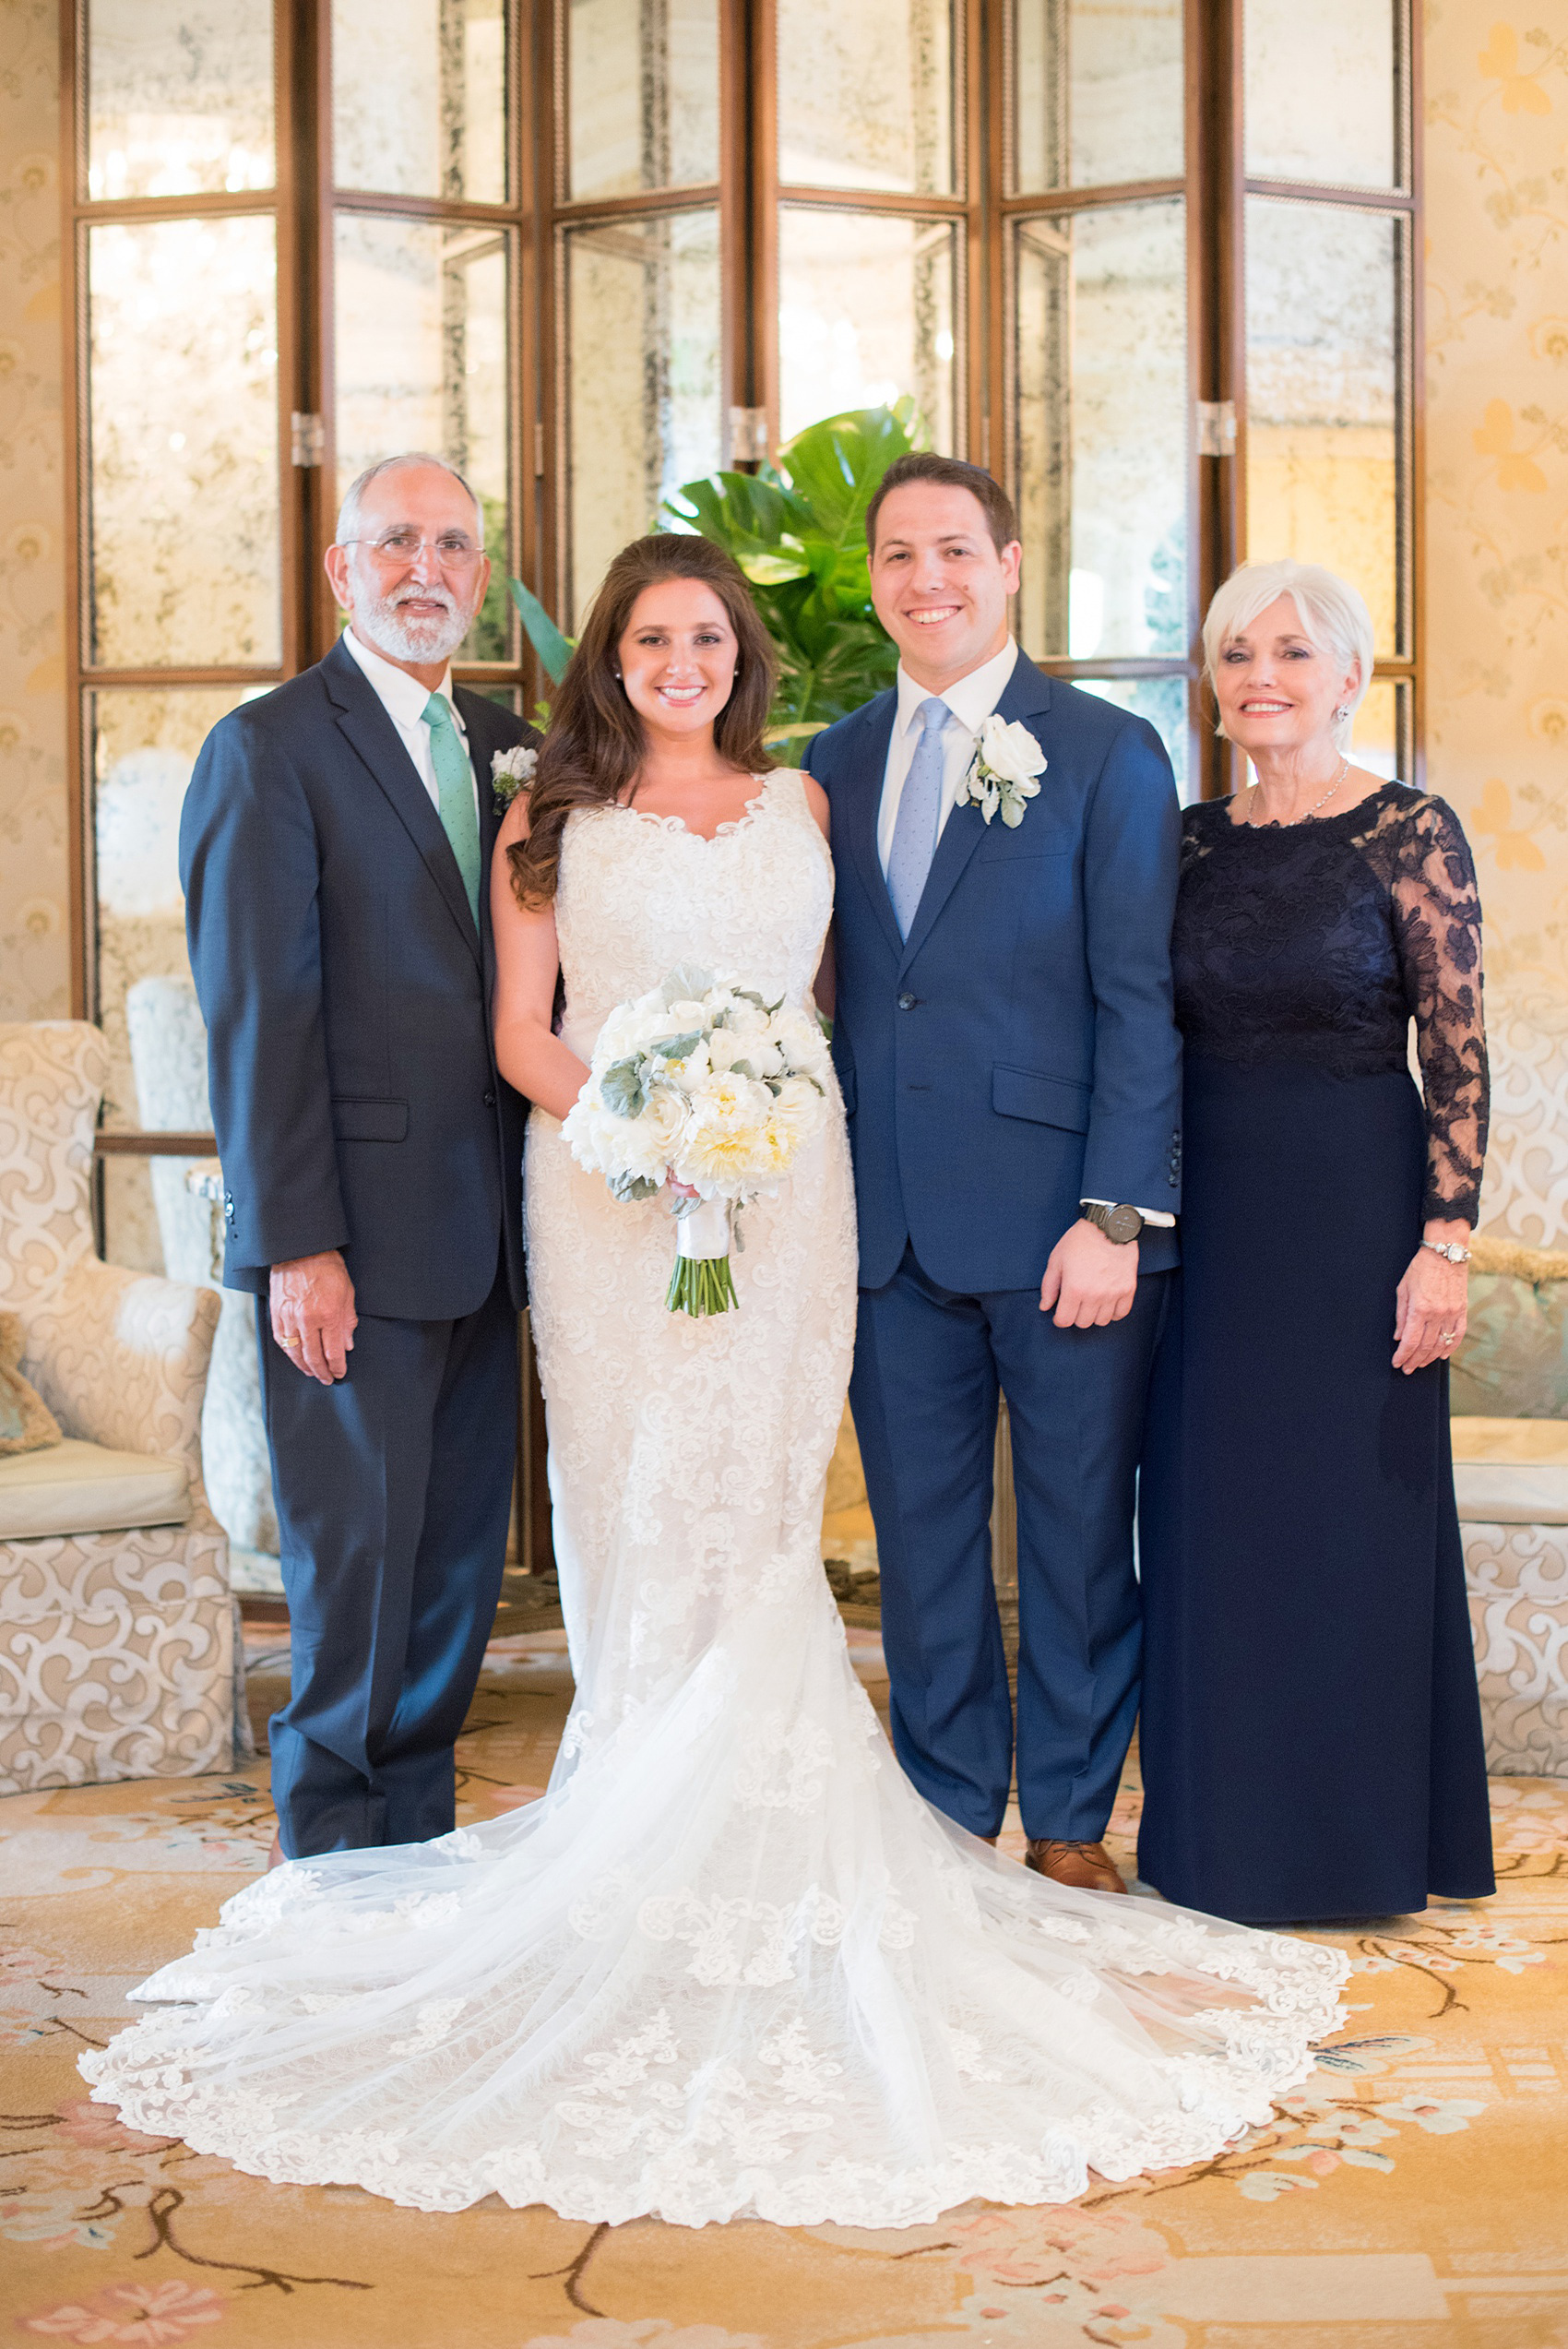 Eau Palm Beach wedding photos by Mikkel Paige Photography. This luxury Florida resort is a beautiful destination location for a wedding! The ornate lobby was the perfect location for family photos. Click through for more details from this waterfront wedding! #WestPalmBeach #EauPalmBeach #BeachWedding #turtles